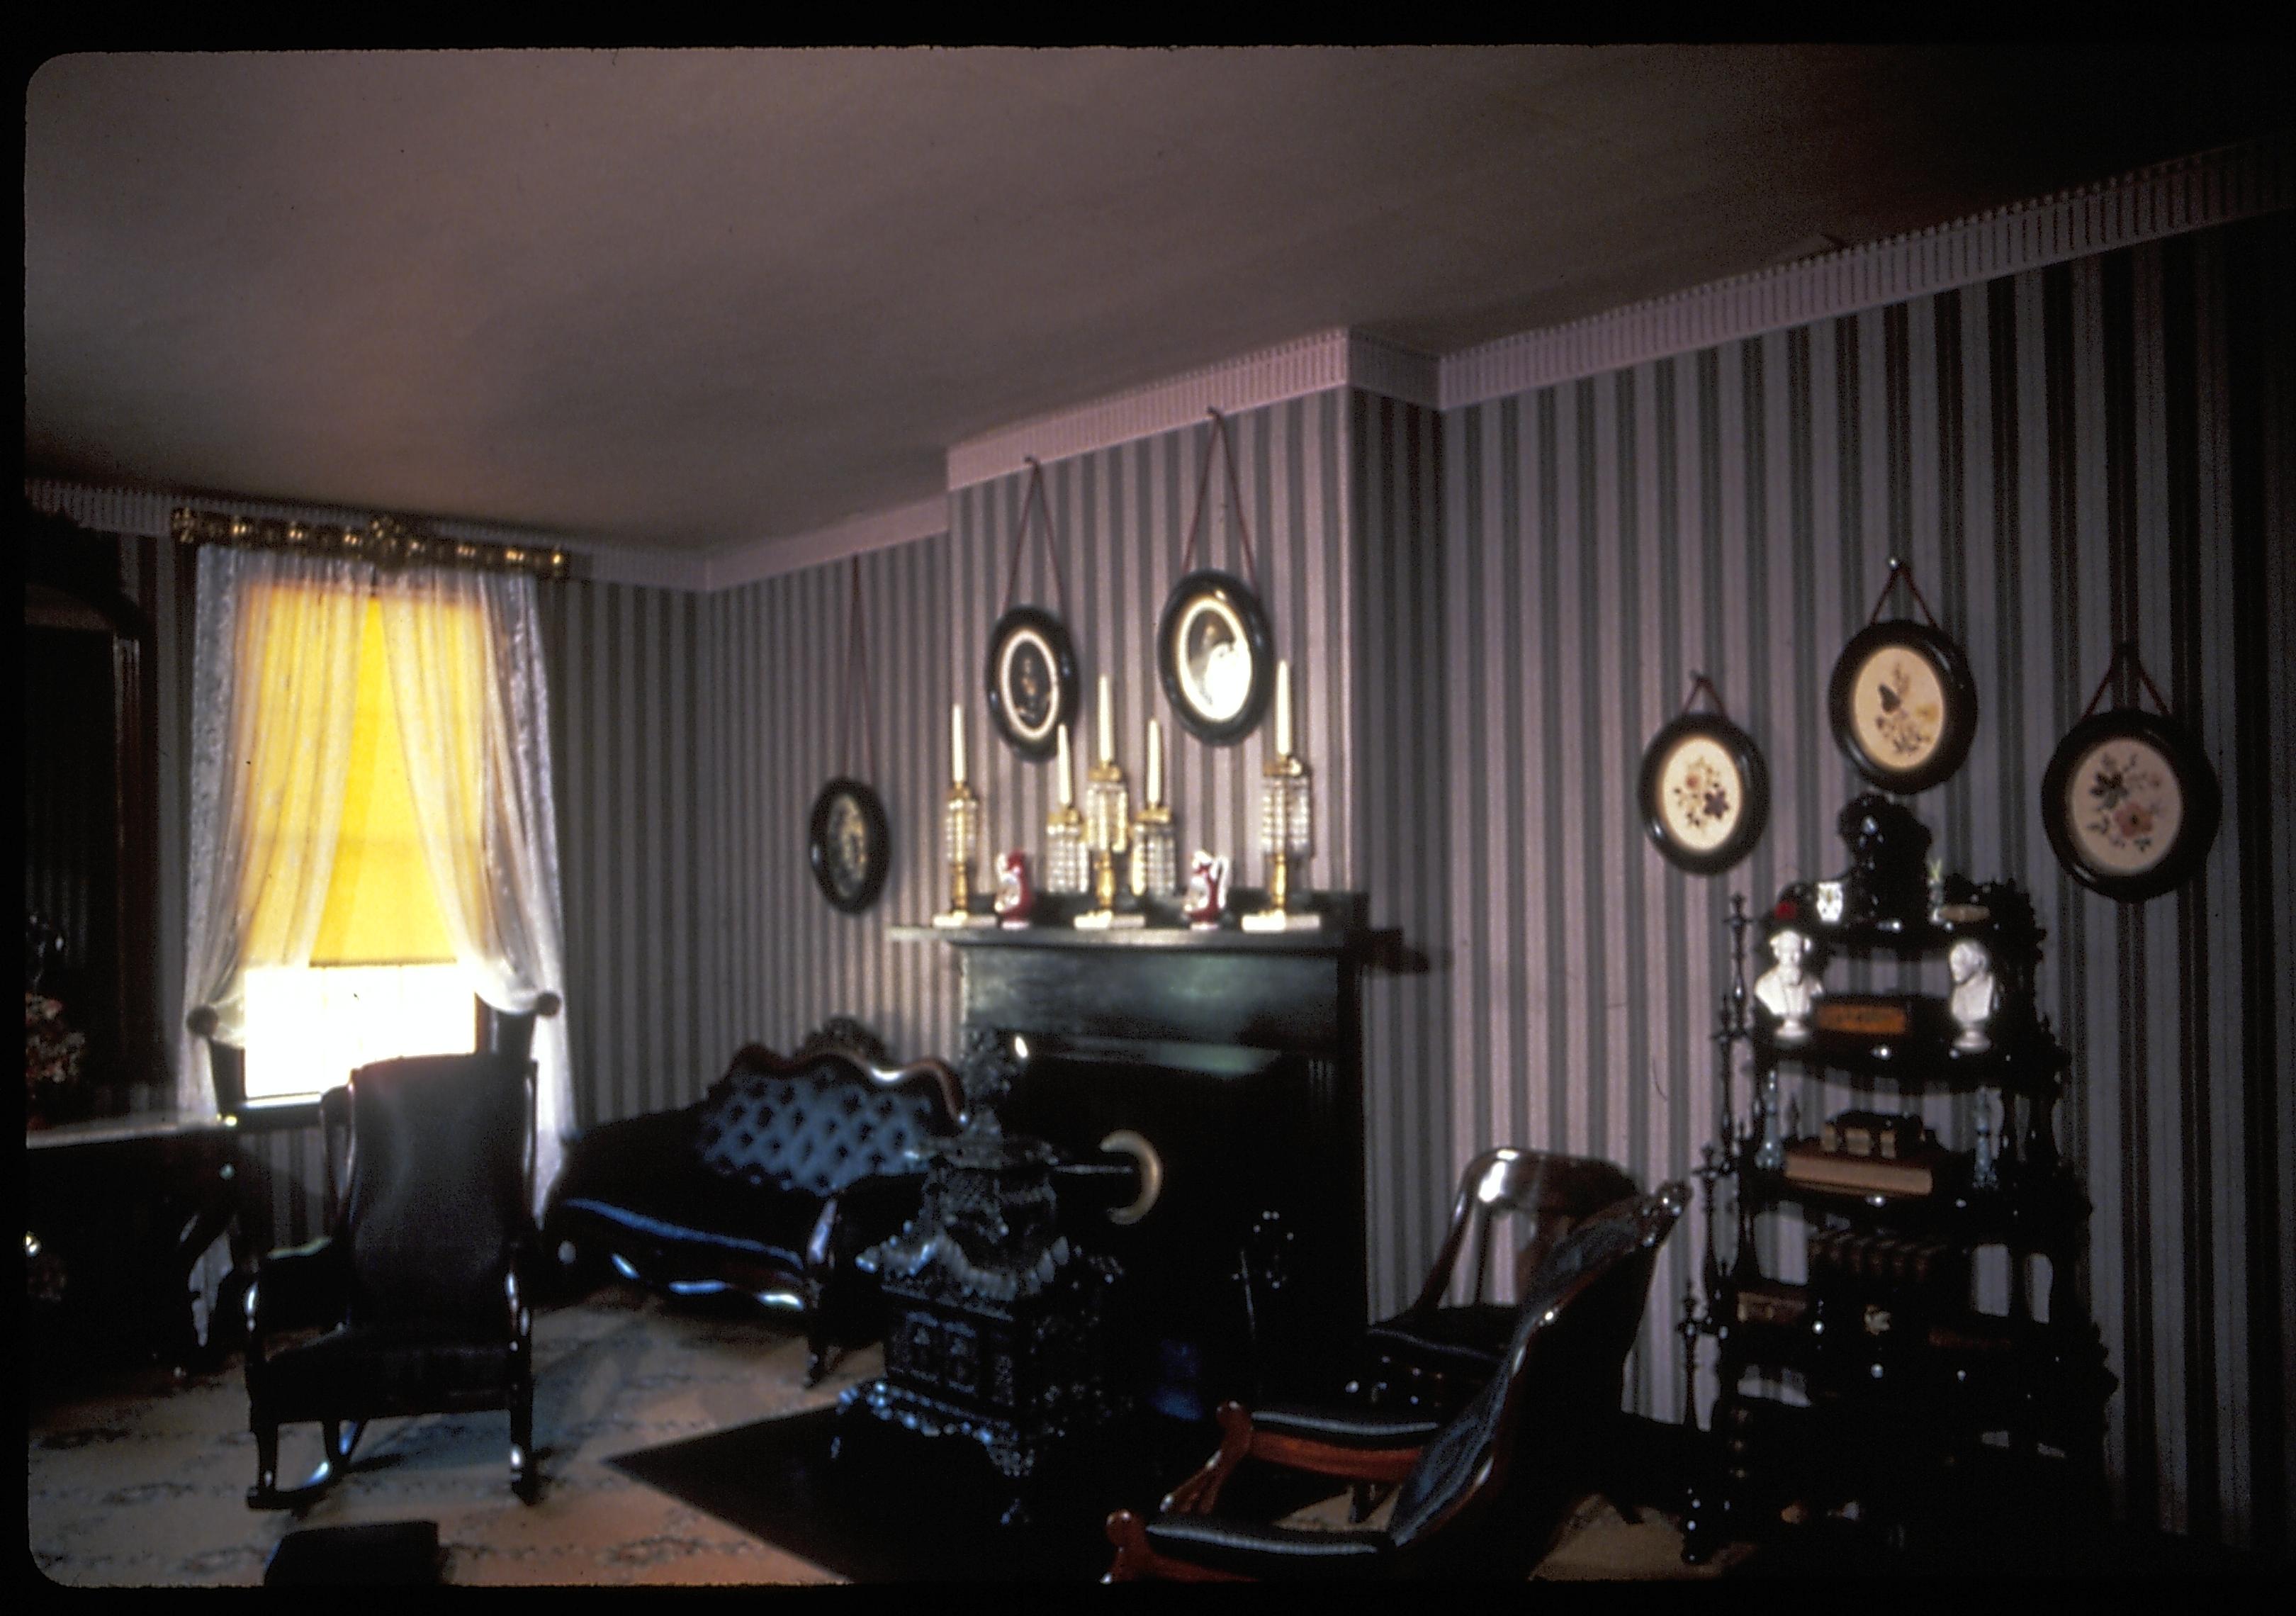 Lincoln's Bedroom Lincoln Home and Formal Parlor Lincoln Home, Bedroom, fireplace, chairs, chaise, window, wall fixtures